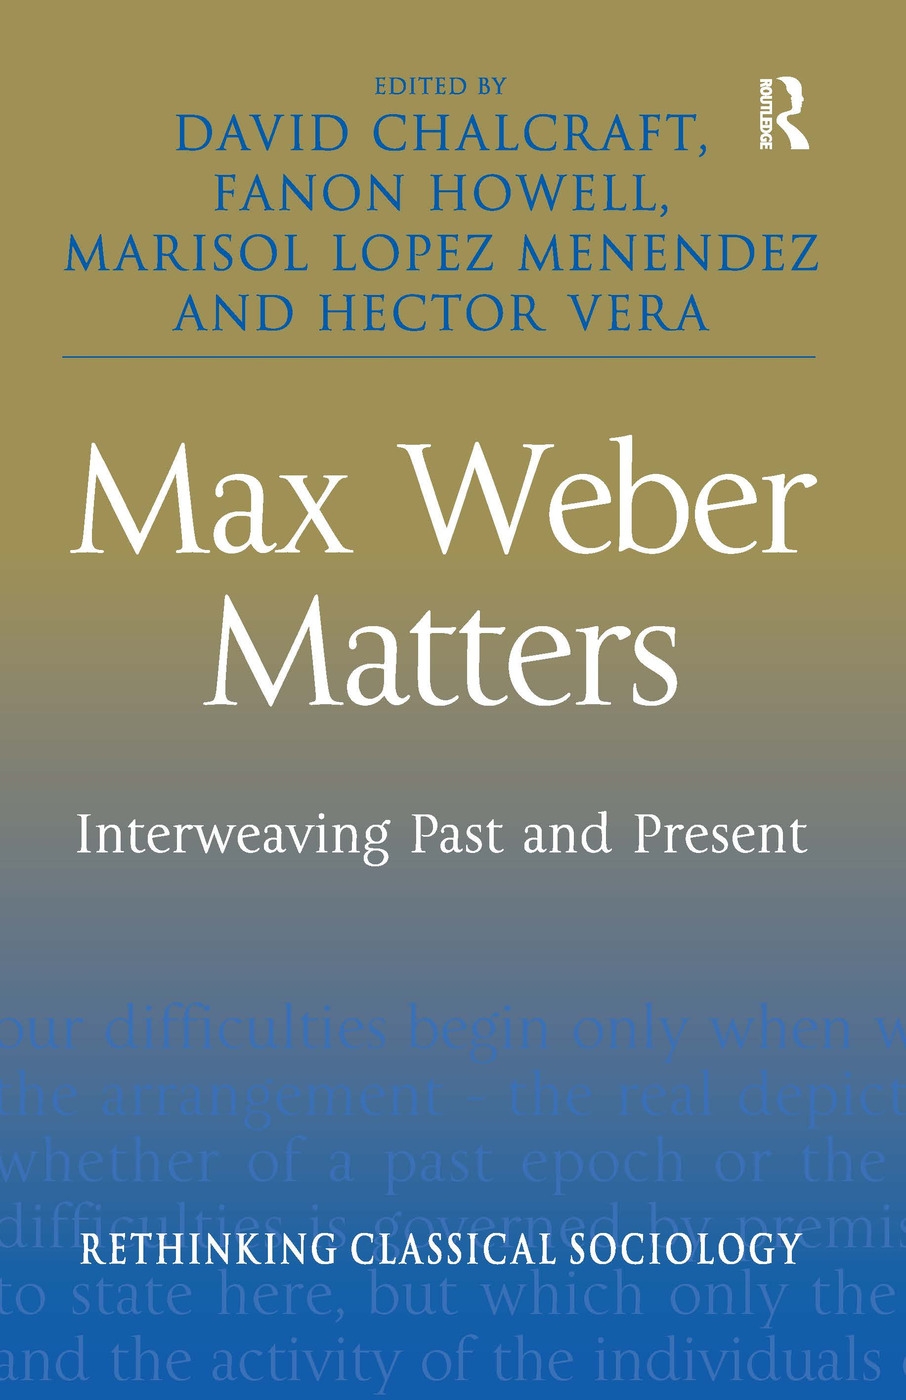 Max Weber Matters: Interweaving Past and Present. Edited by David Chalcraft ... [Et Al.]